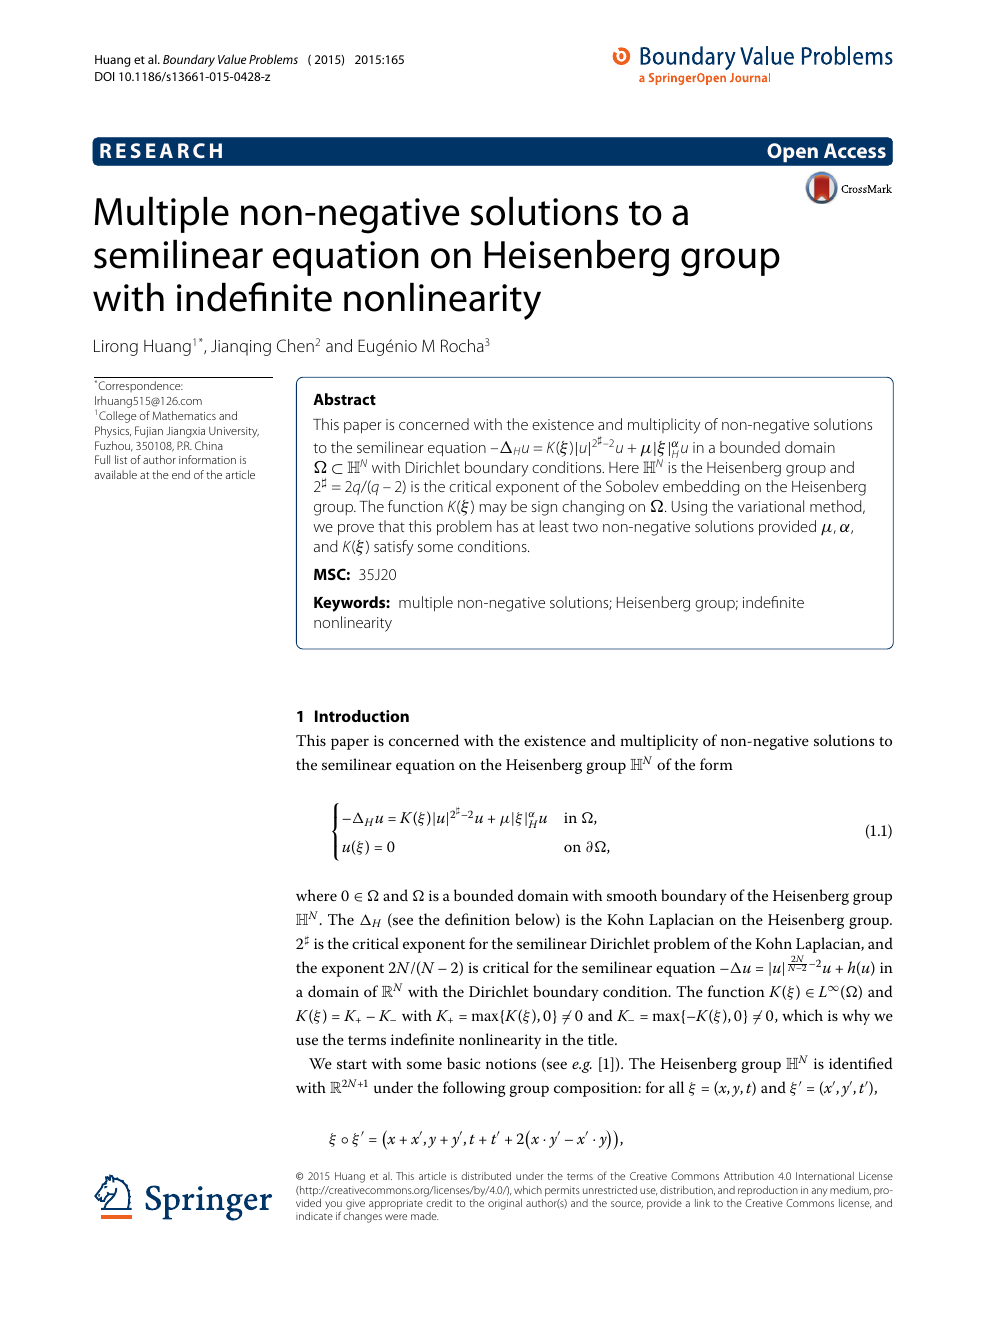 Multiple Non Negative Solutions To A Semilinear Equation On Heisenberg Group With Indefinite Nonlinearity Topic Of Research Paper In Mathematics Download Scholarly Article Pdf And Read For Free On Cyberleninka Open Science